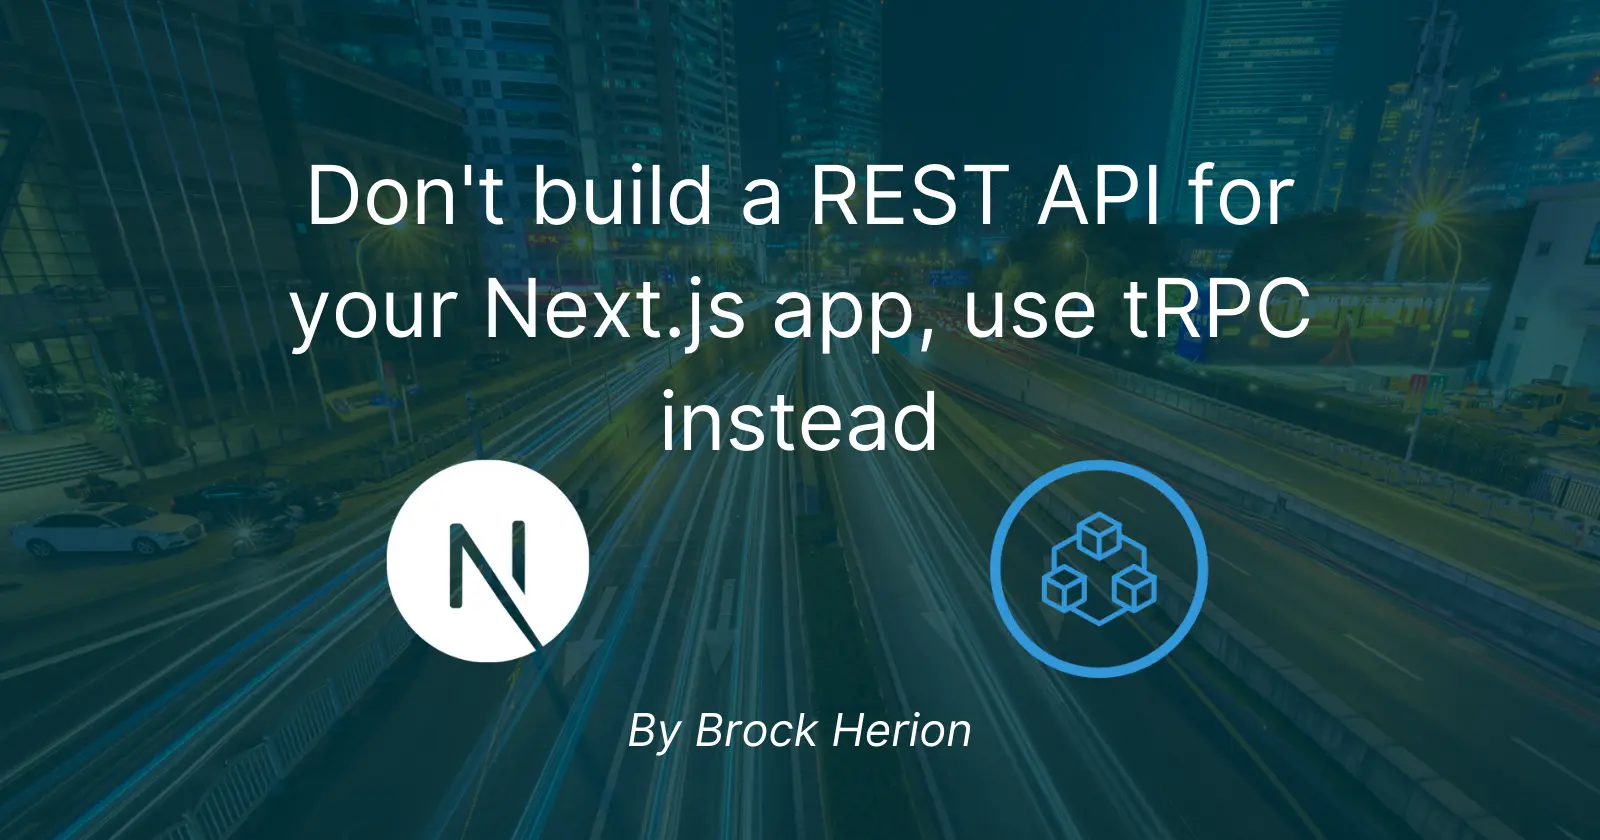 Stop building REST APIs for your Next.js apps, use tRPC instead